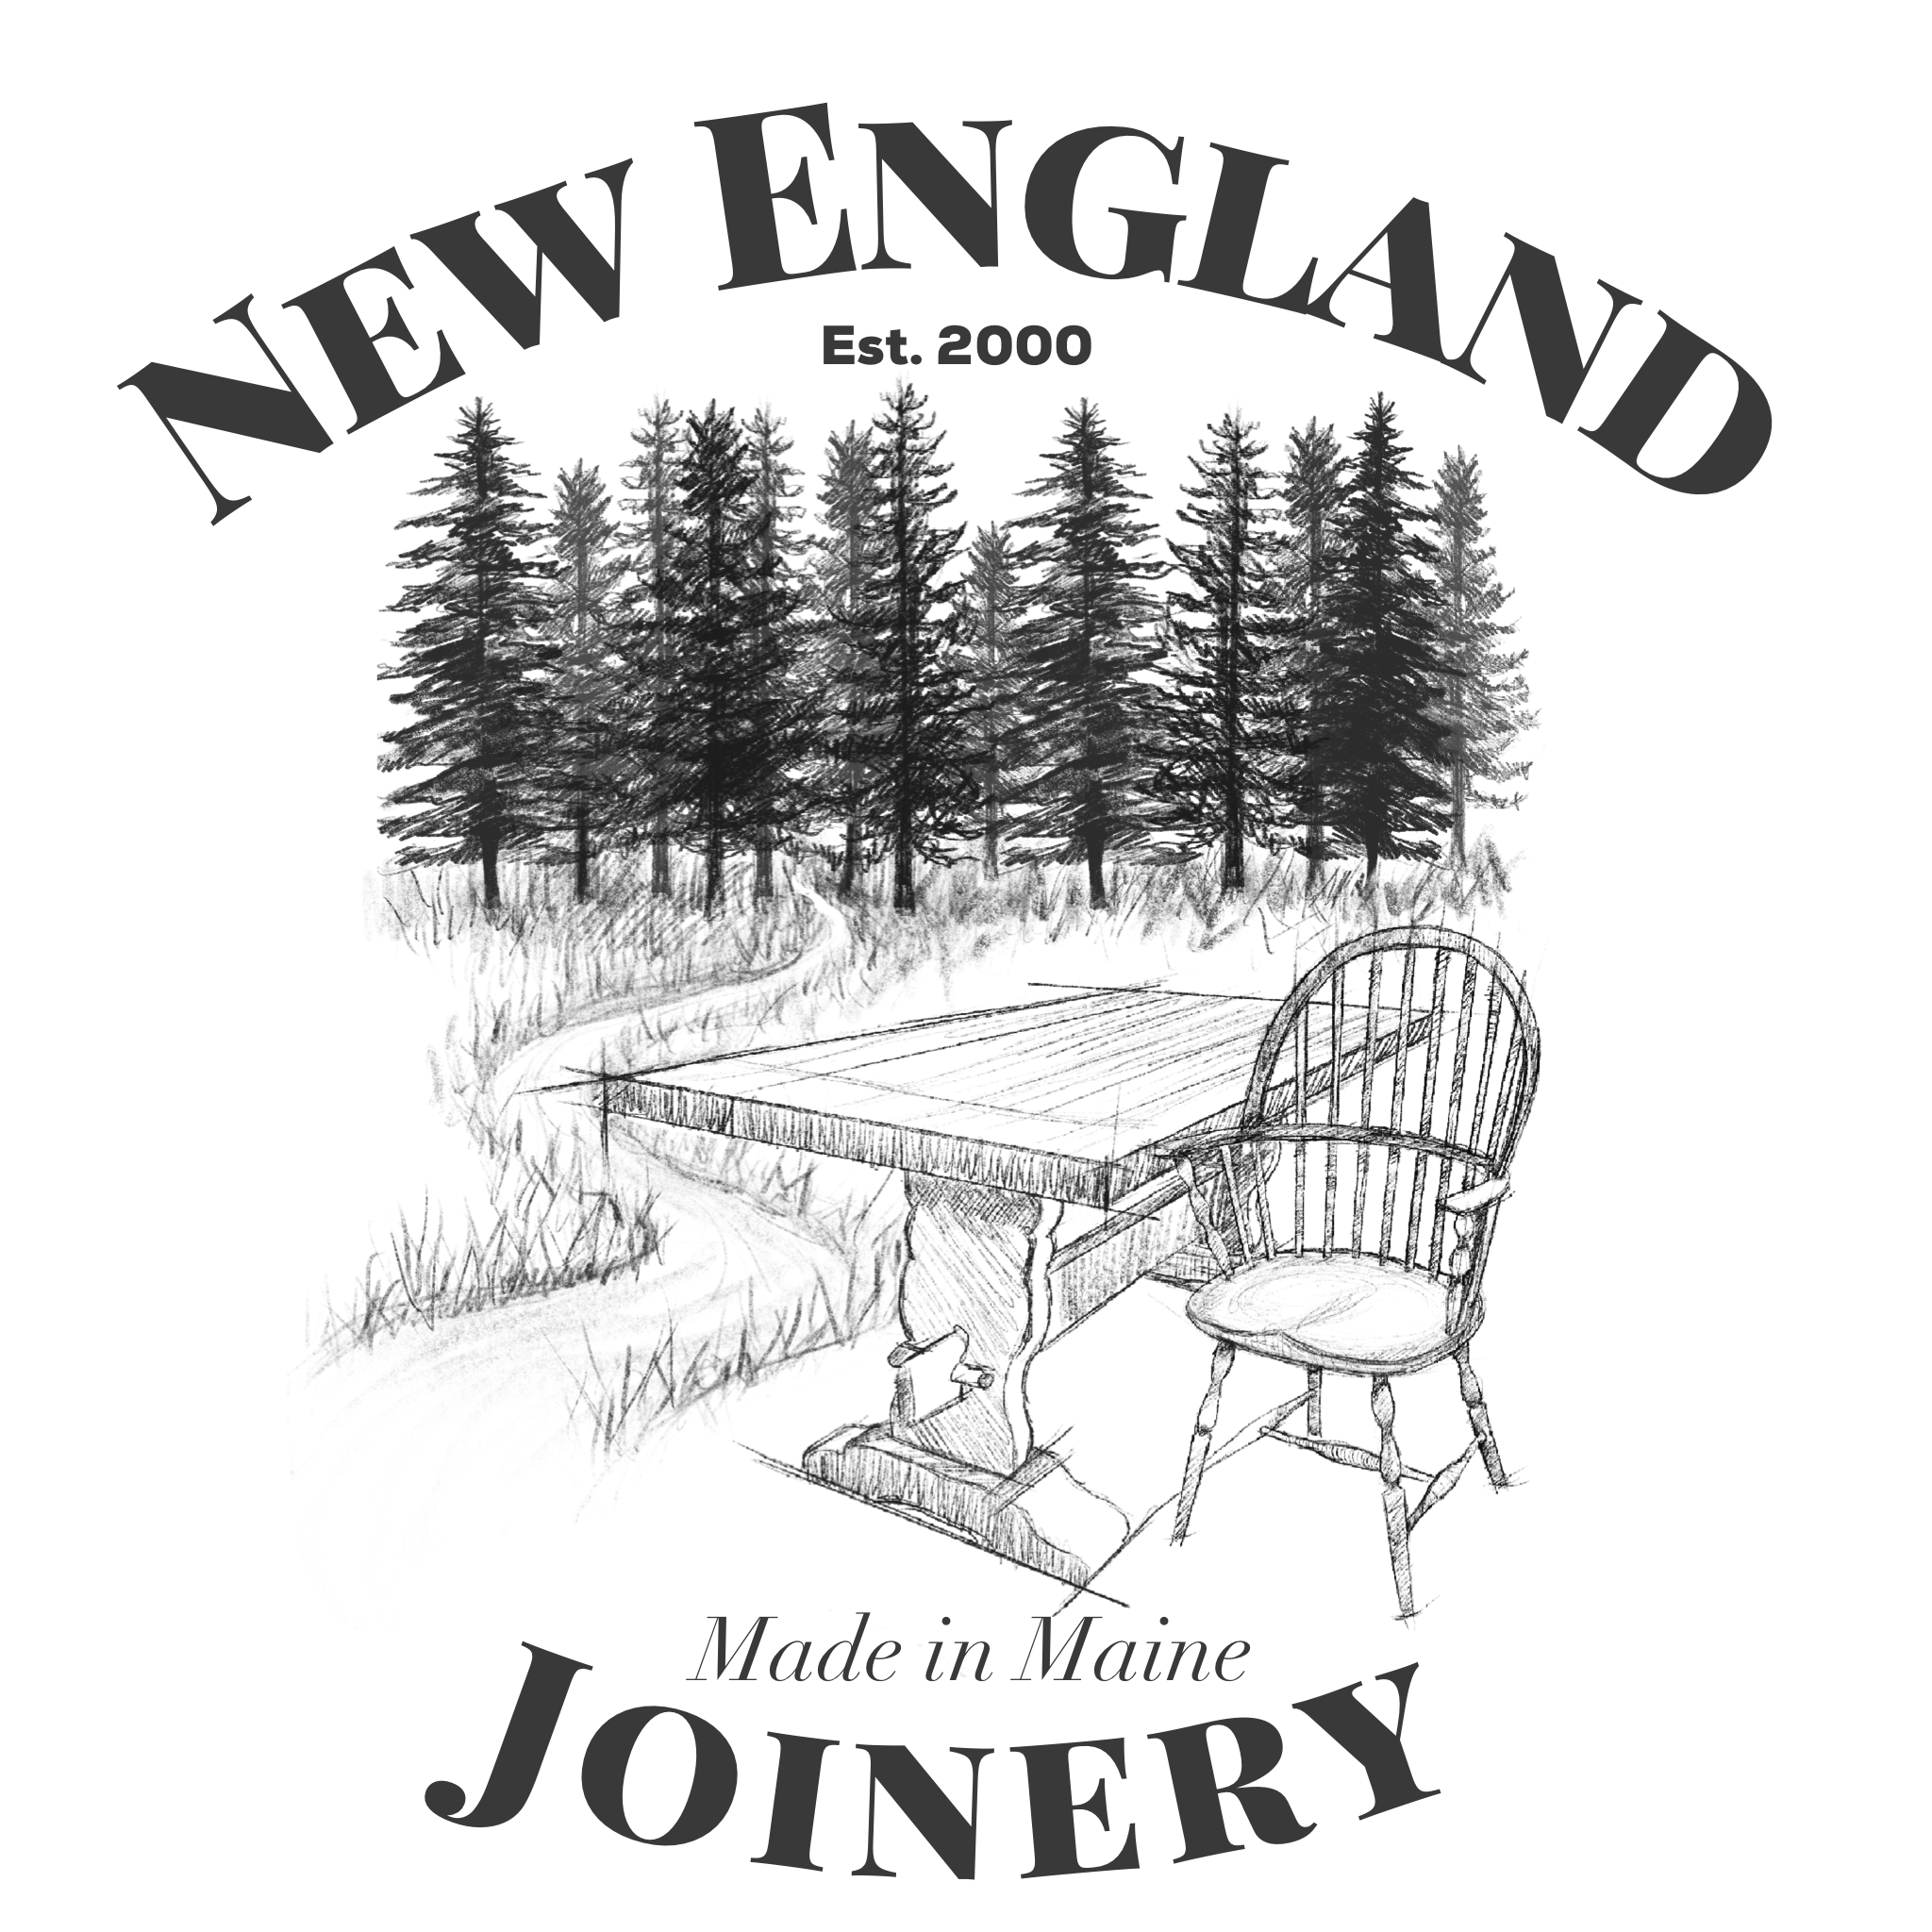 New England Joinery